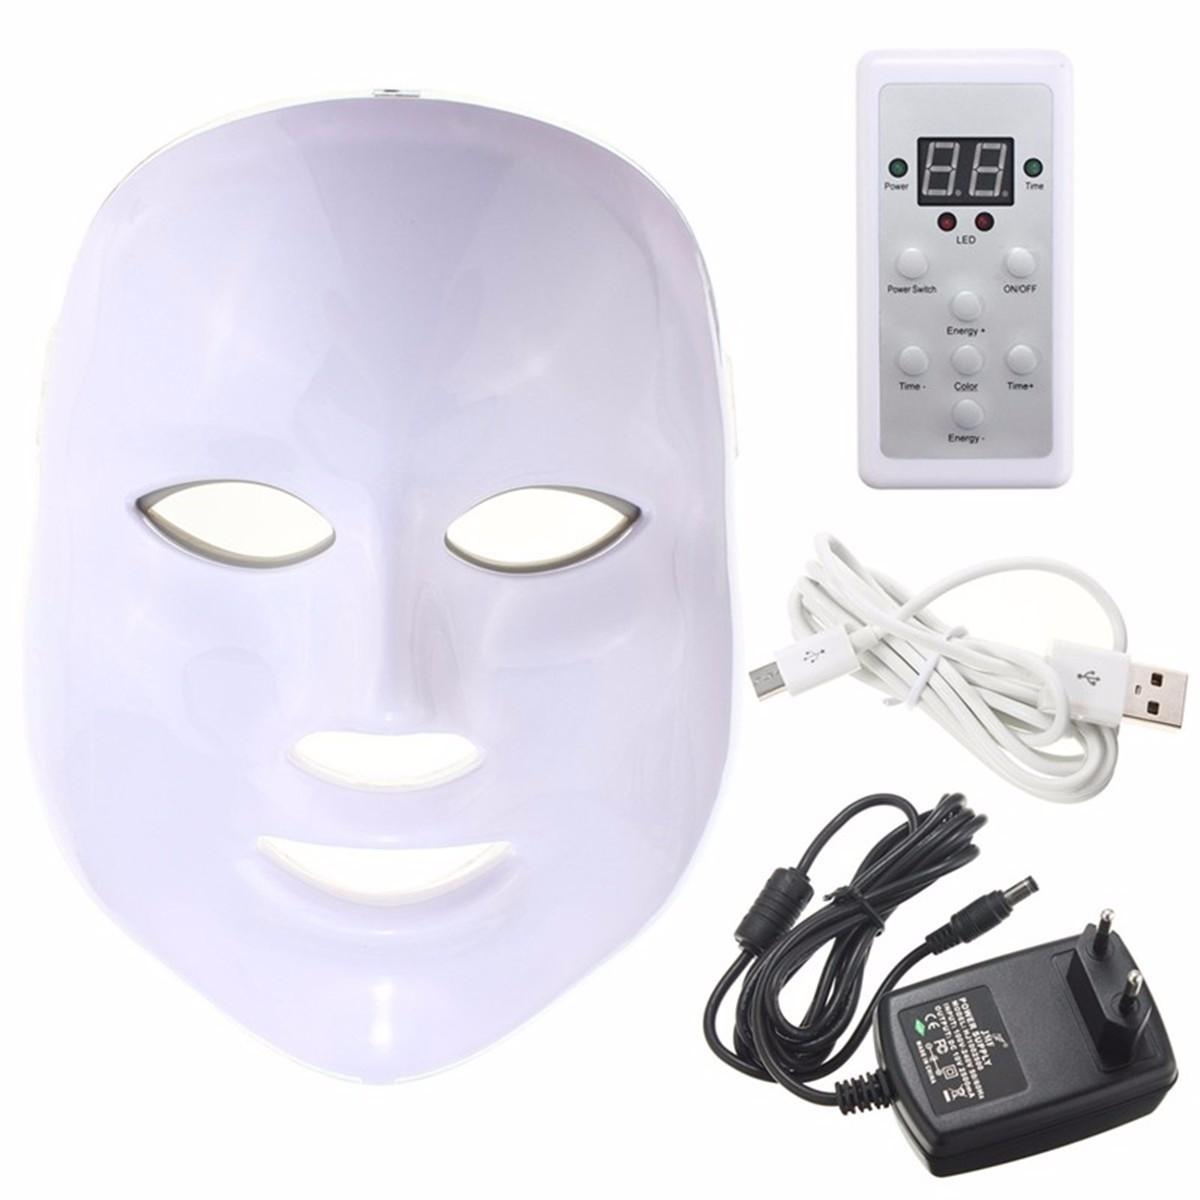 

Photon LED Skin Rejuvenation Therapy Face Facial Mask 3 Colors Light Wrinkle Removal Anti Aging